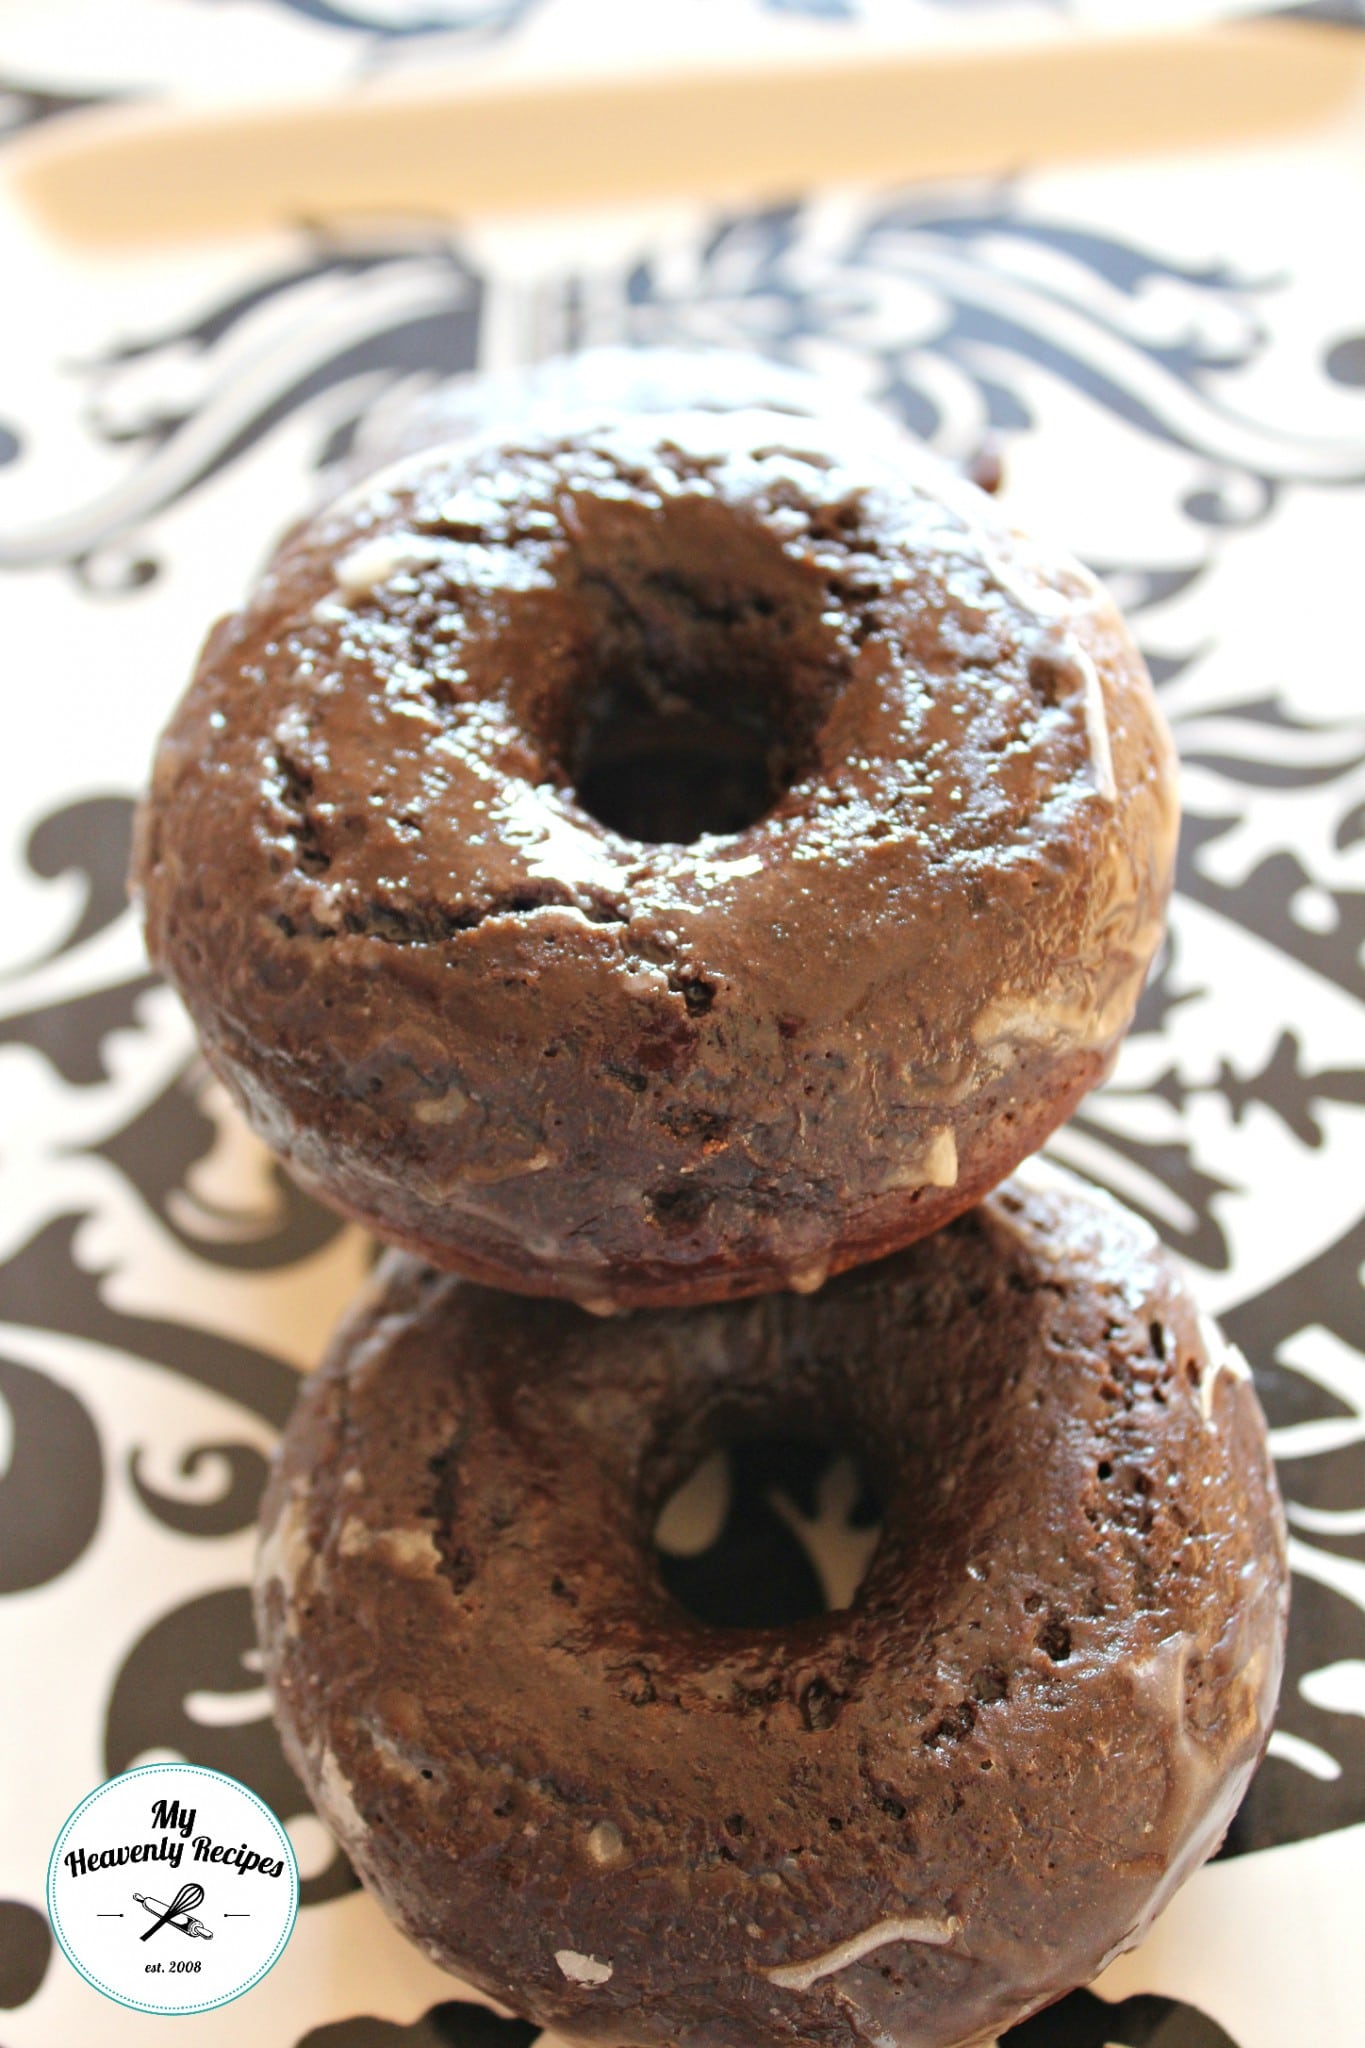 Homemade & Baked Chocolate Donuts